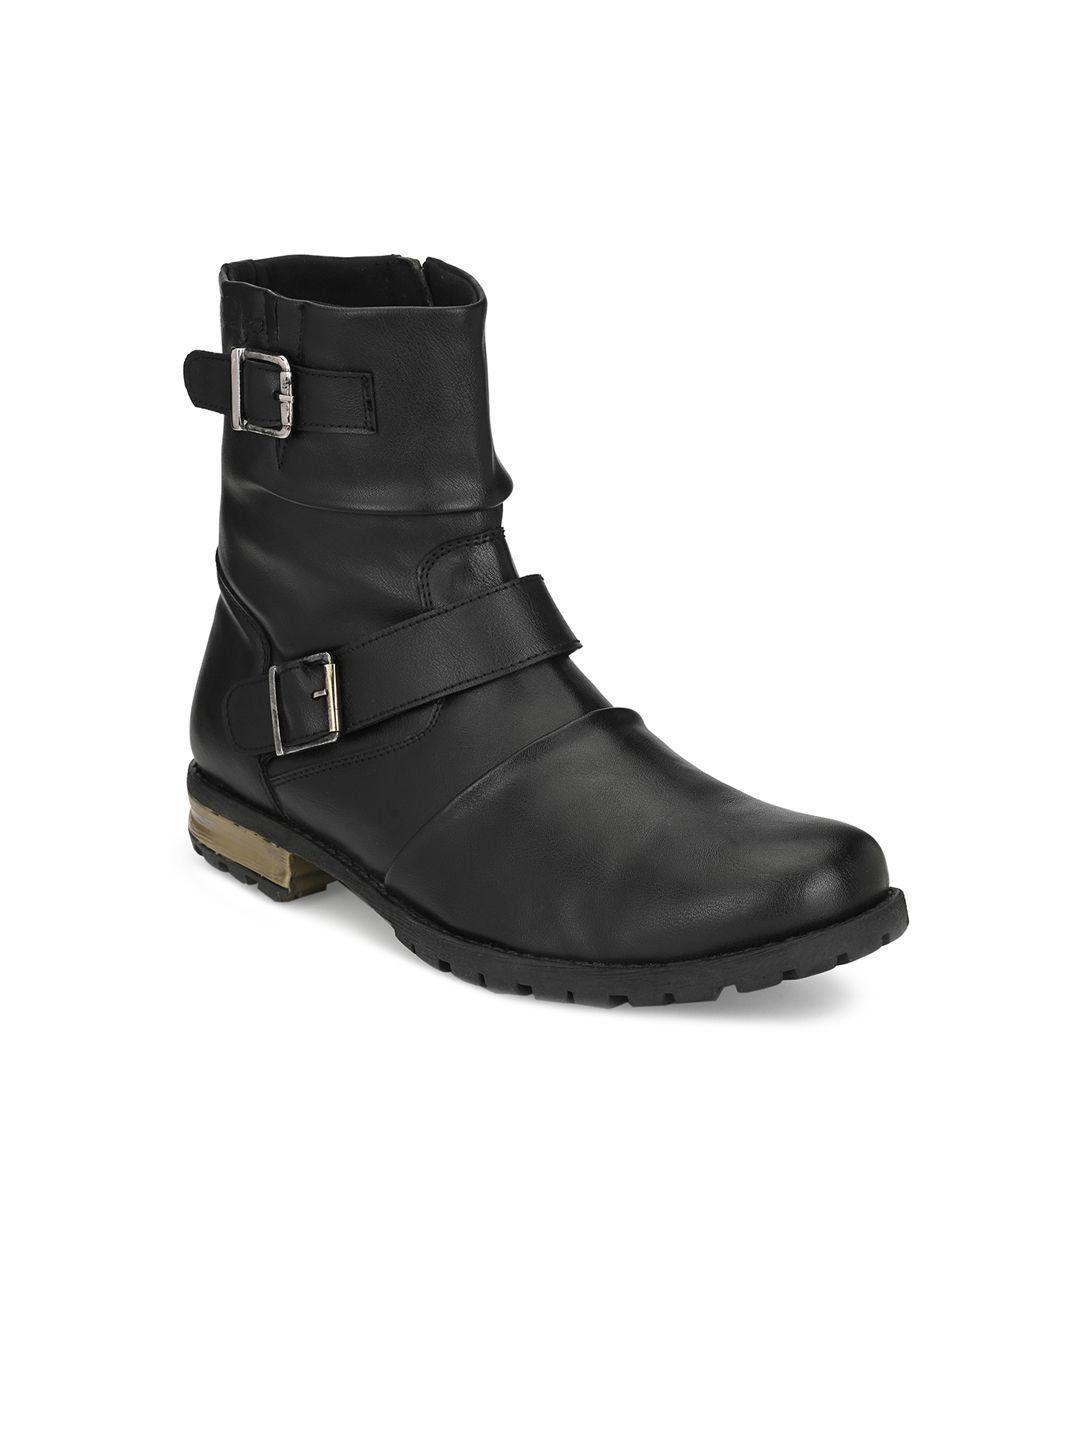 delize men black solid leather high-top flat boots